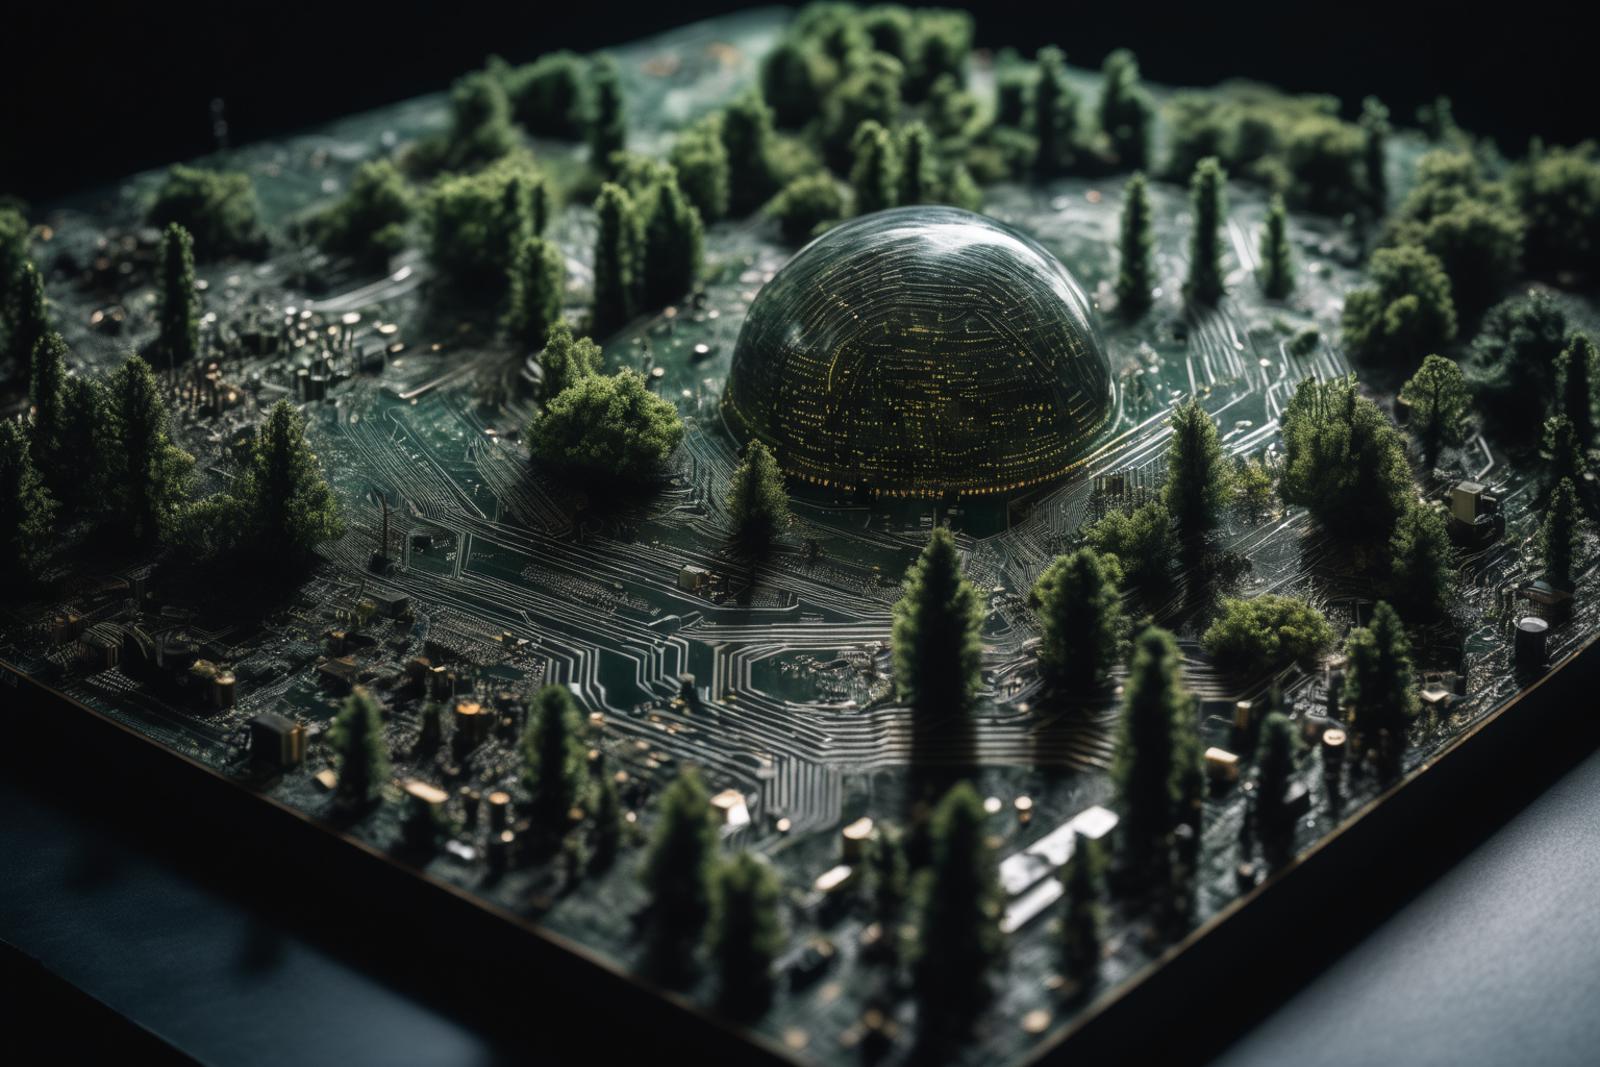 A model of a futuristic city with a green dome in the center and trees and buildings surrounding it.